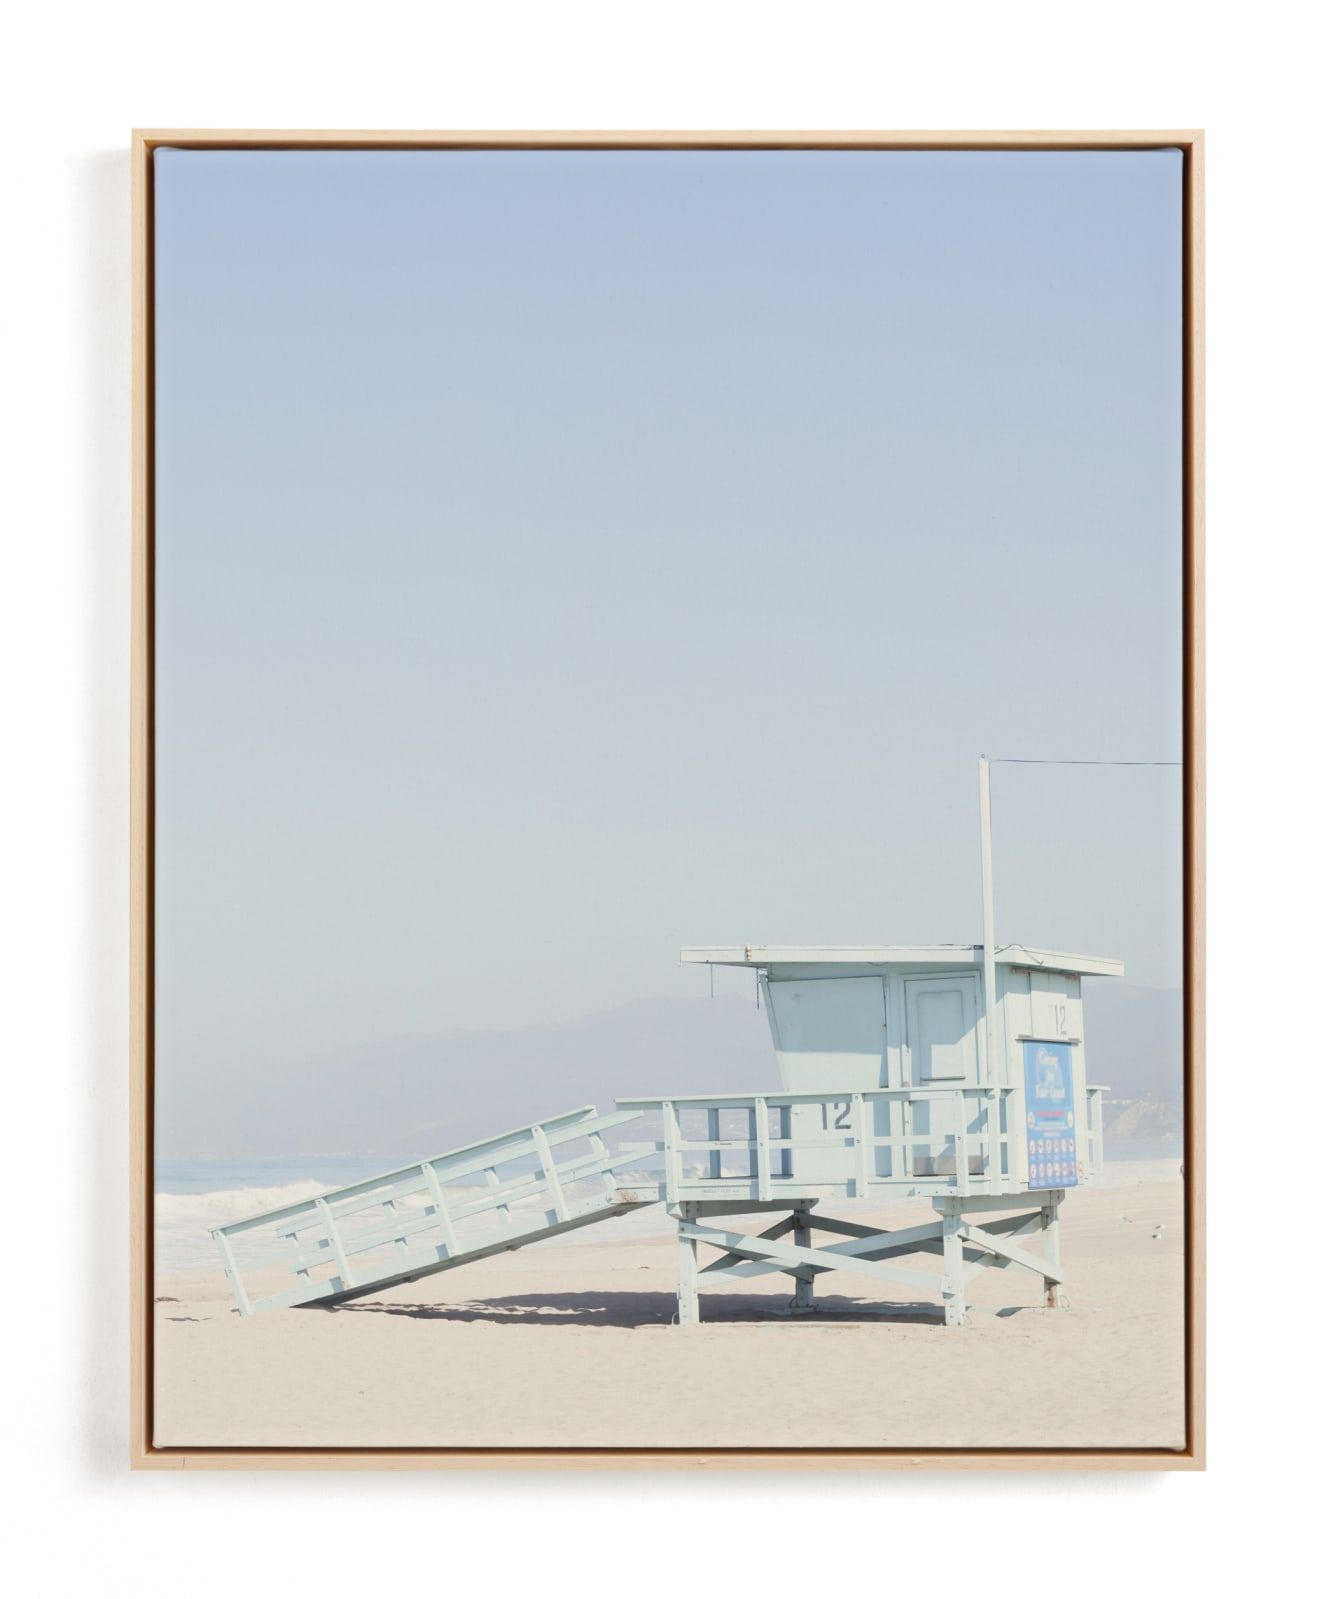 "The Pastel Blue Lifeguard House" - Limited Edition Art Print by Caroline Mint. | Minted